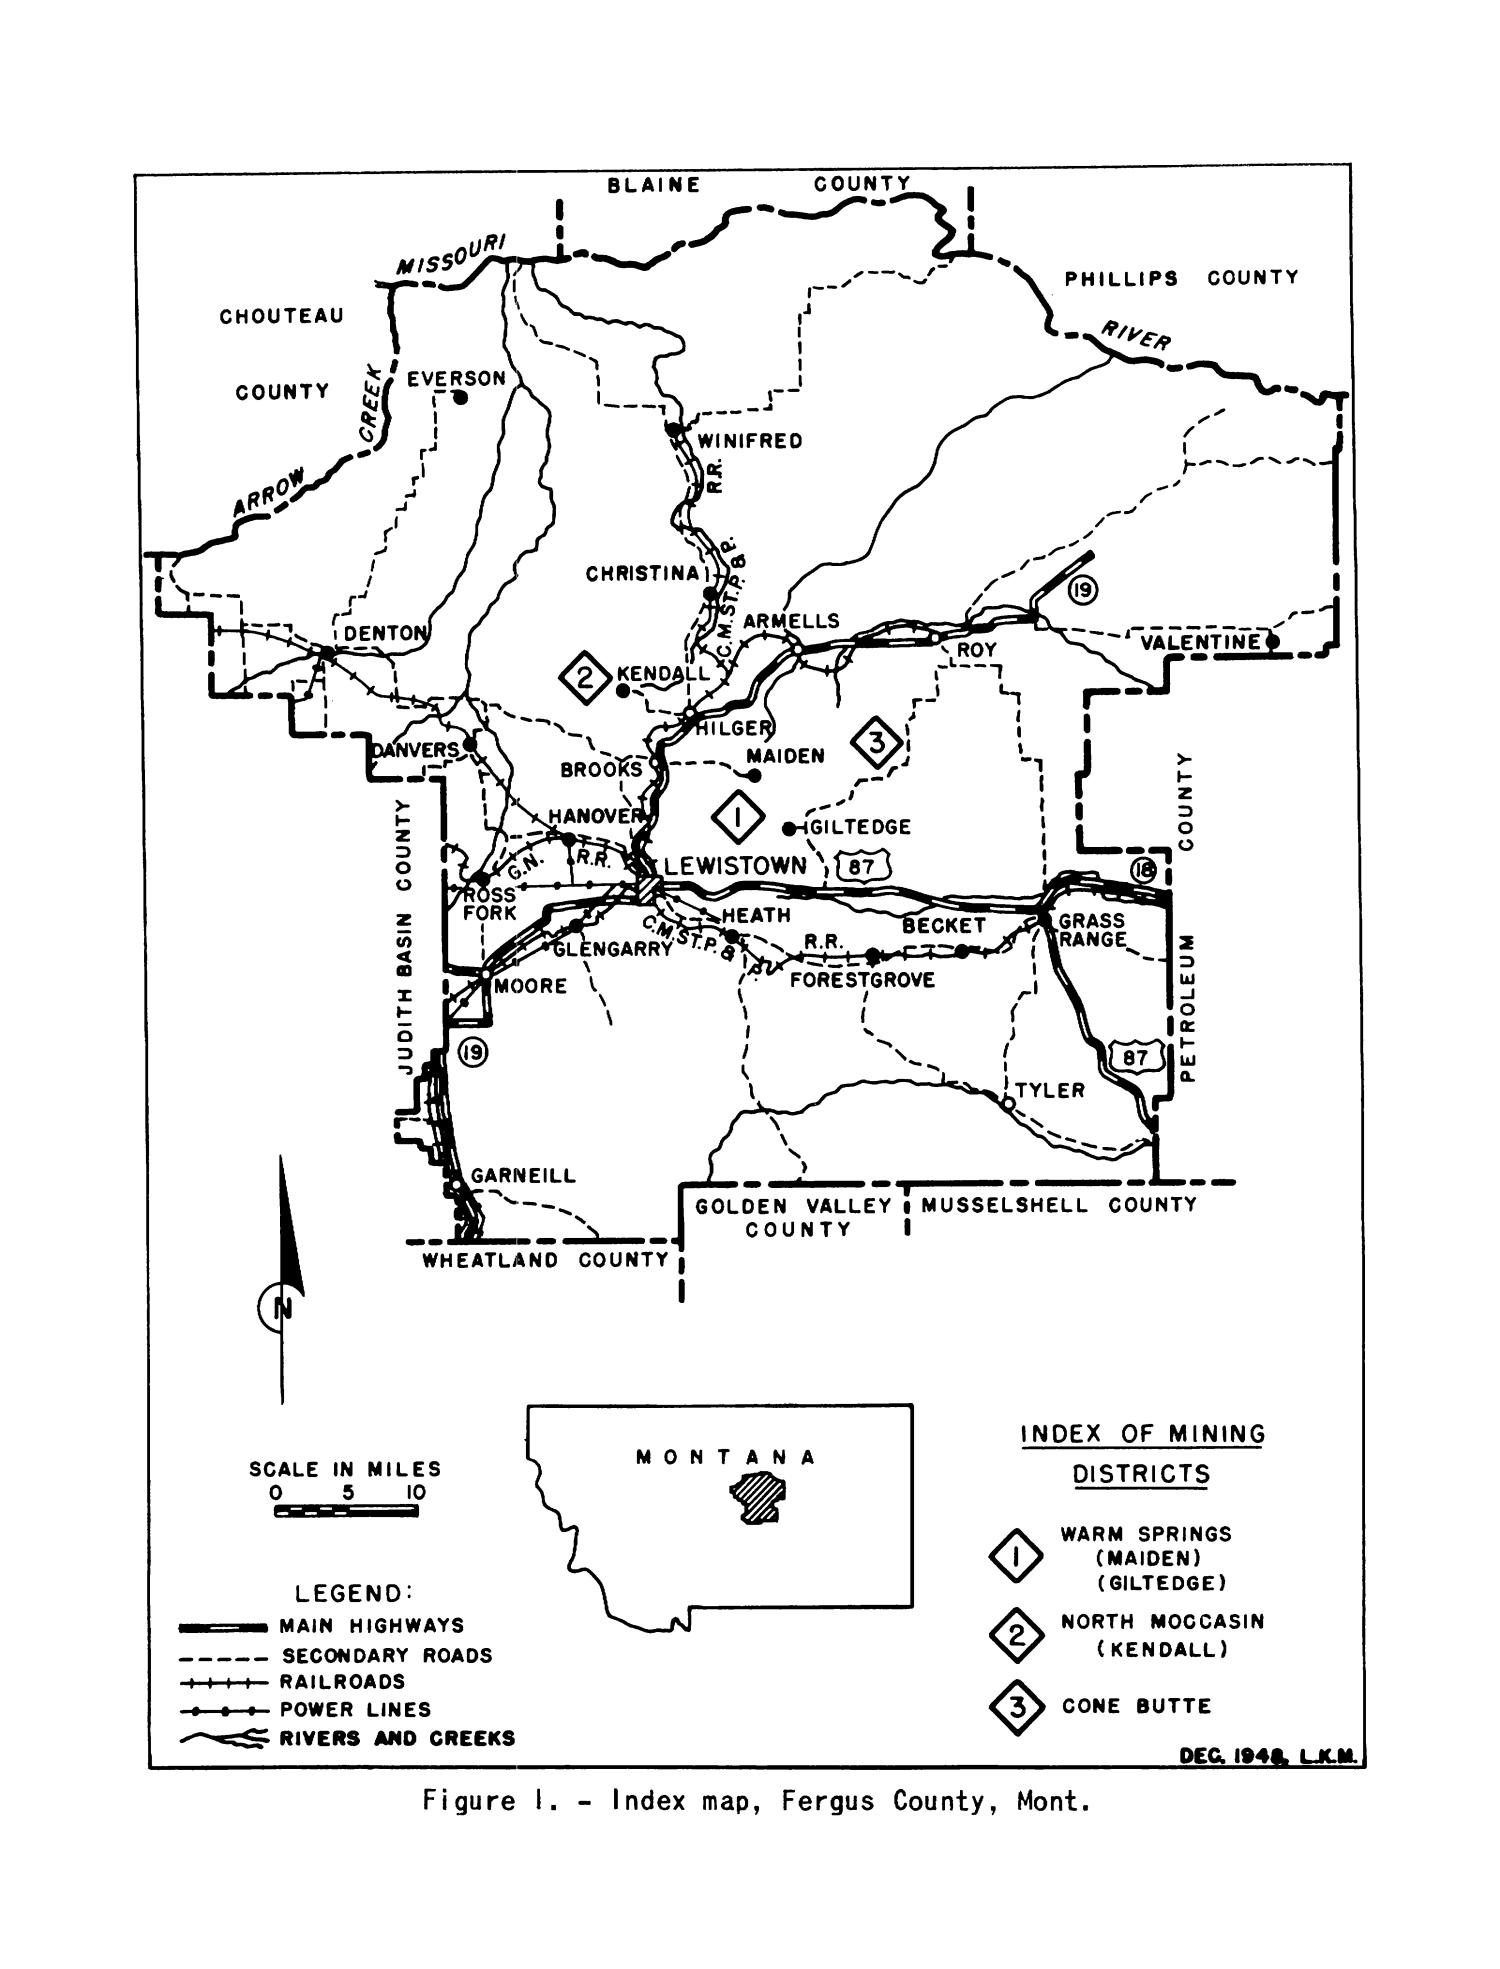 Mines and Mineral Deposits (Except Fuels) Fergus County, Montana
                                                
                                                    None
                                                